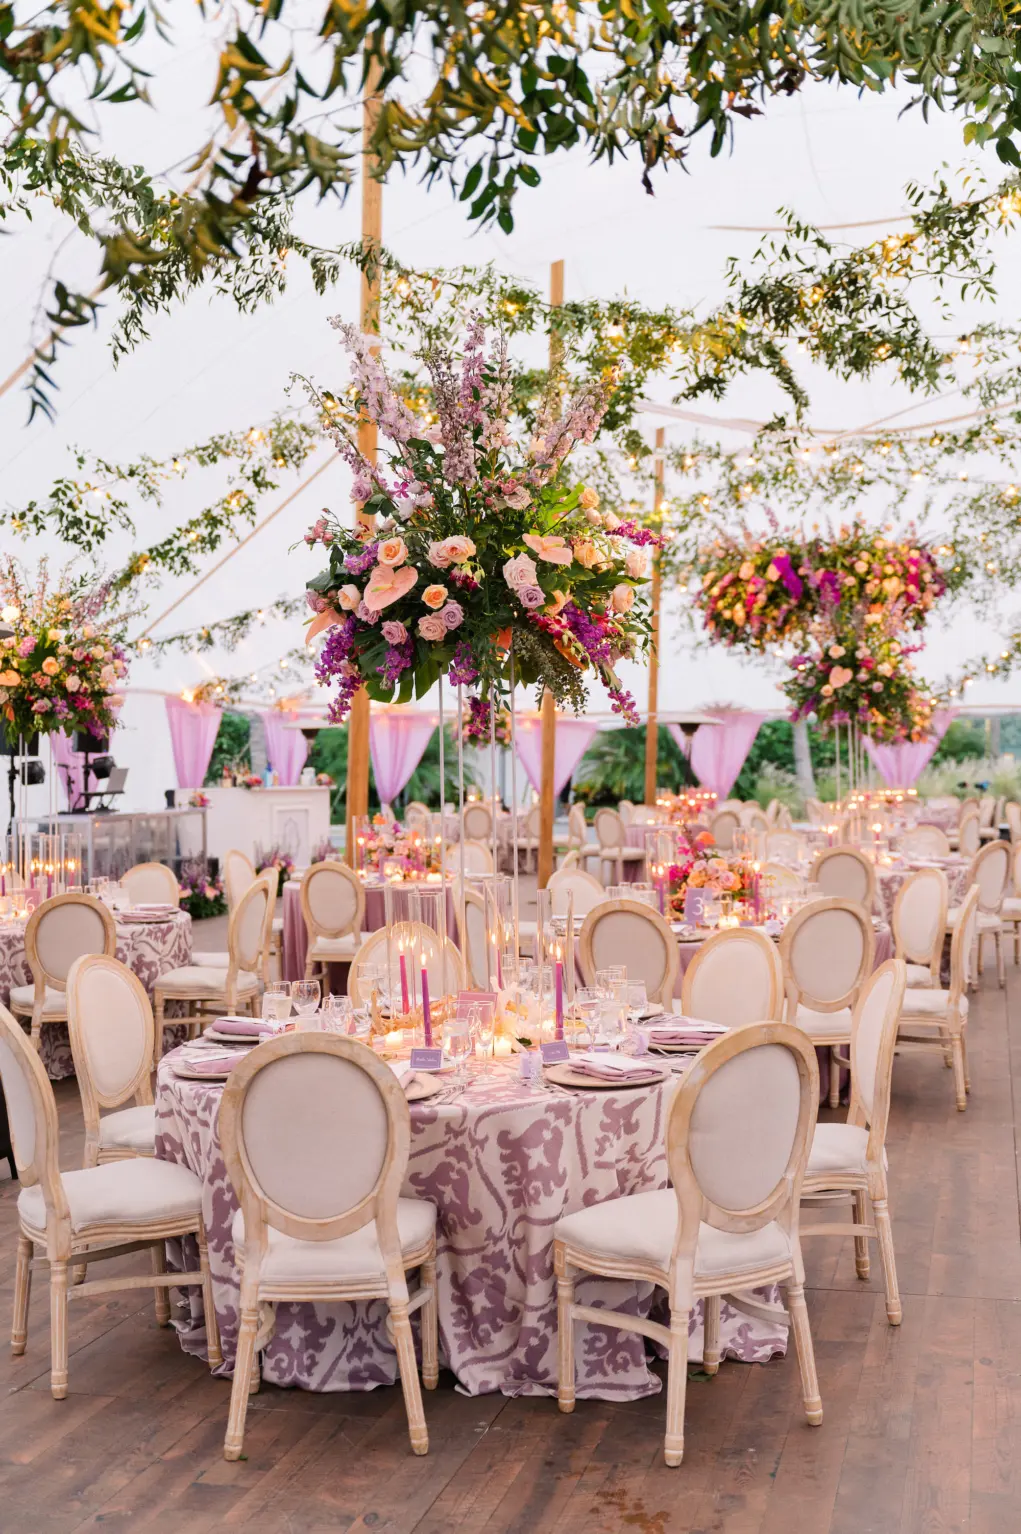 Tall Flower Stand with Purple and Orange Roses, Stock Flowers and Greenery Tall Wedding Reception Centerpiece Ideas | Sarasota Venue The Resort at Longboat Key Club | Florist Botanica Design Studio